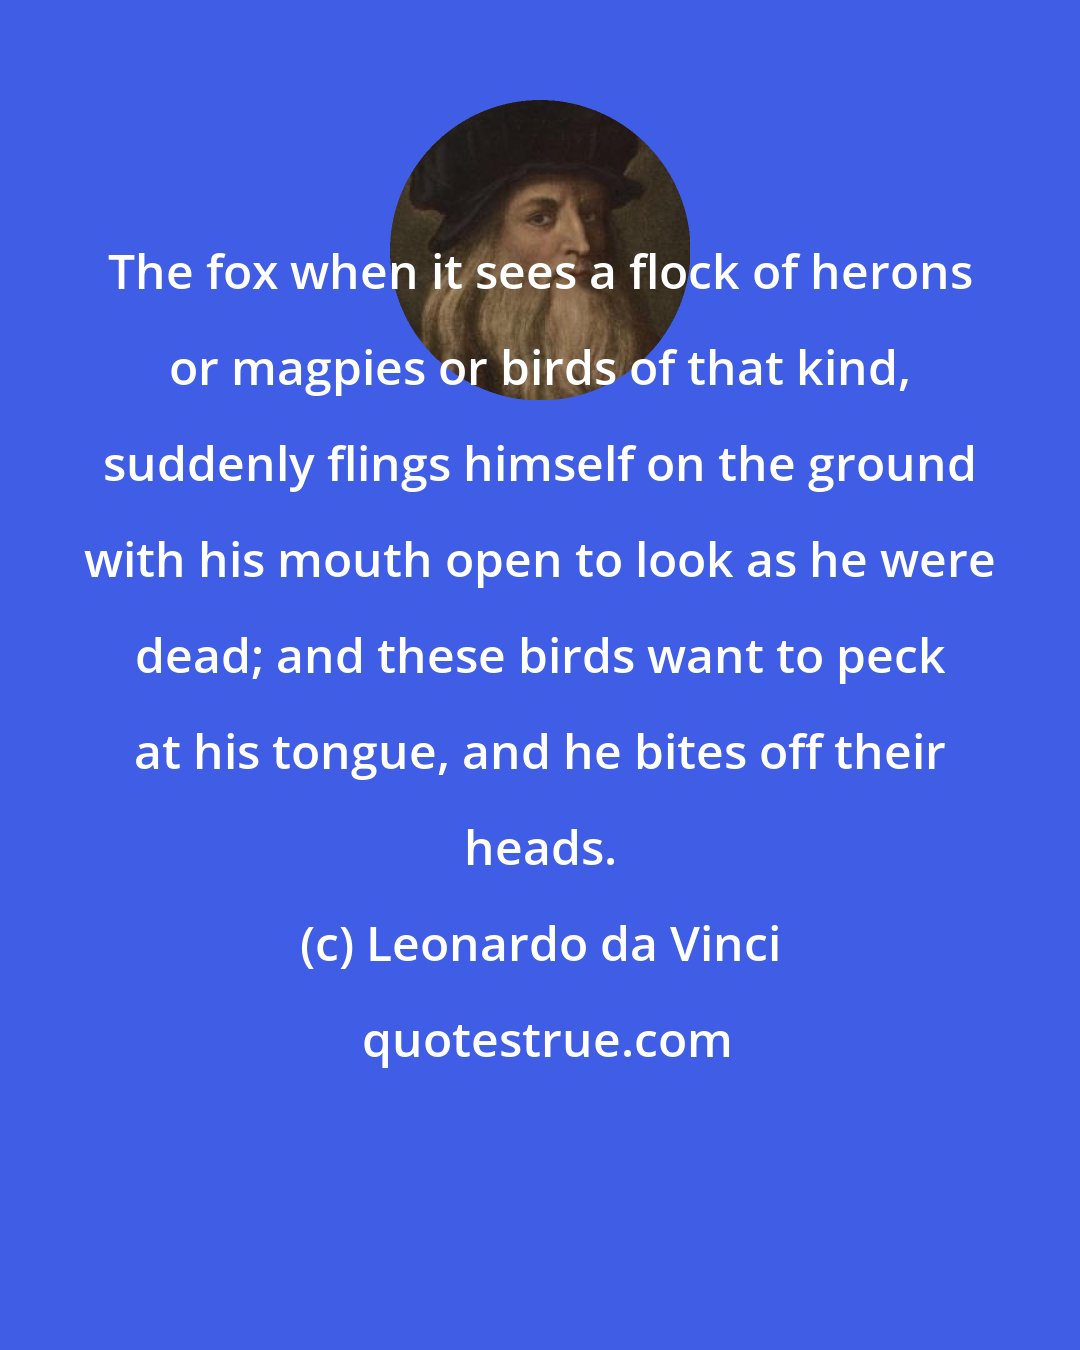 Leonardo da Vinci: The fox when it sees a flock of herons or magpies or birds of that kind, suddenly flings himself on the ground with his mouth open to look as he were dead; and these birds want to peck at his tongue, and he bites off their heads.